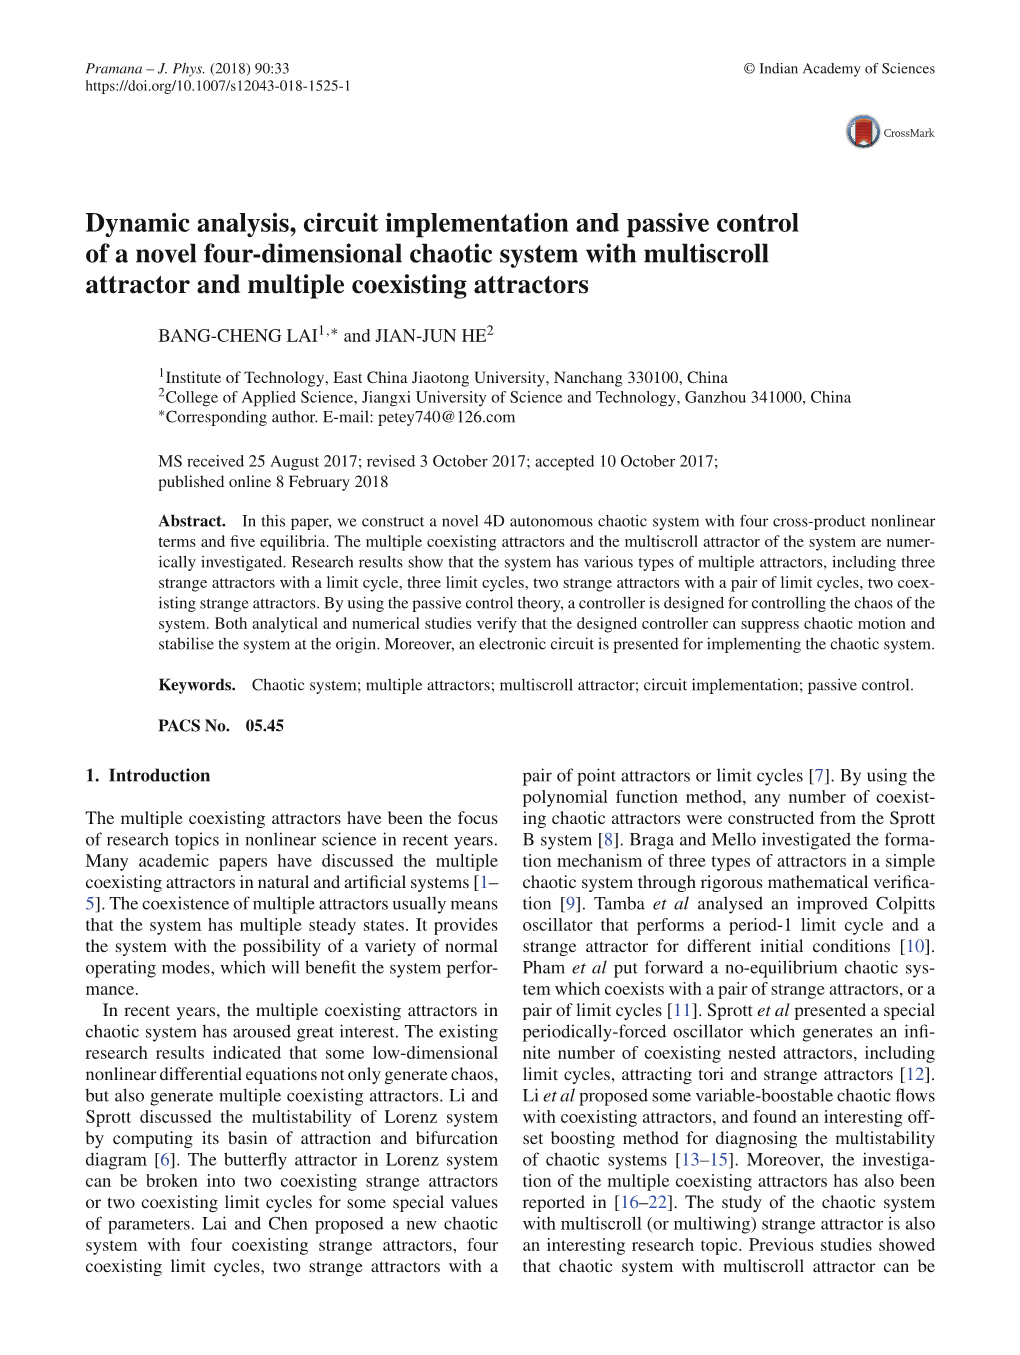 Dynamic Analysis, Circuit Implementation and Passive Control of a Novel Four-Dimensional Chaotic System with Multiscroll Attractor and Multiple Coexisting Attractors